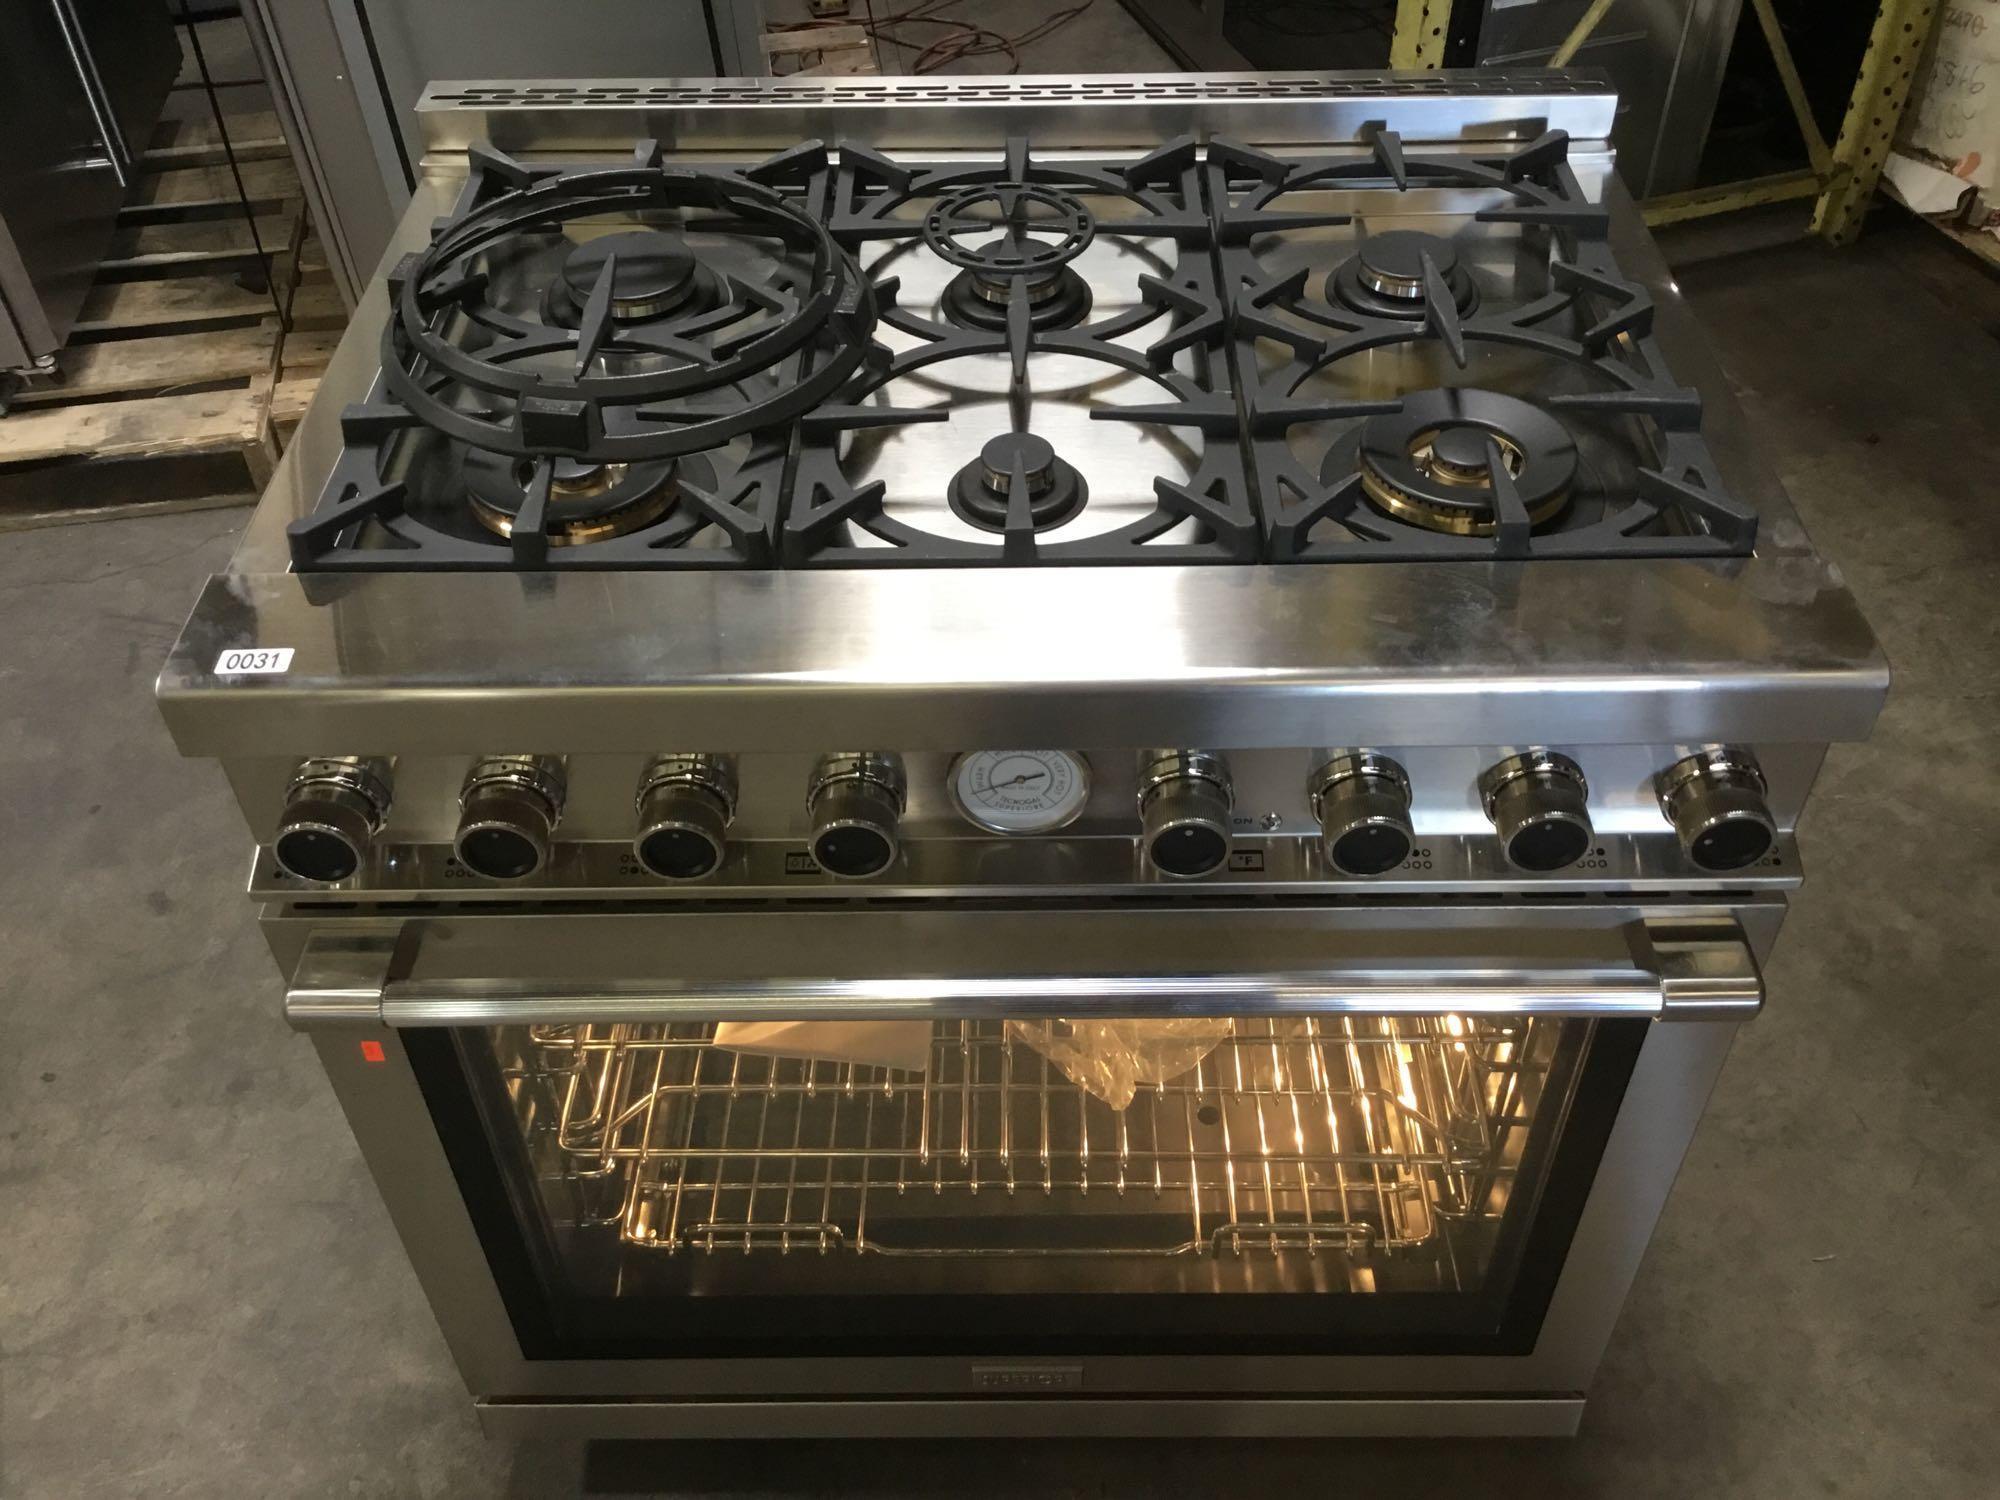 Tecnogas Superiore Next 36in. Panorama Stainless Steel Gas Range